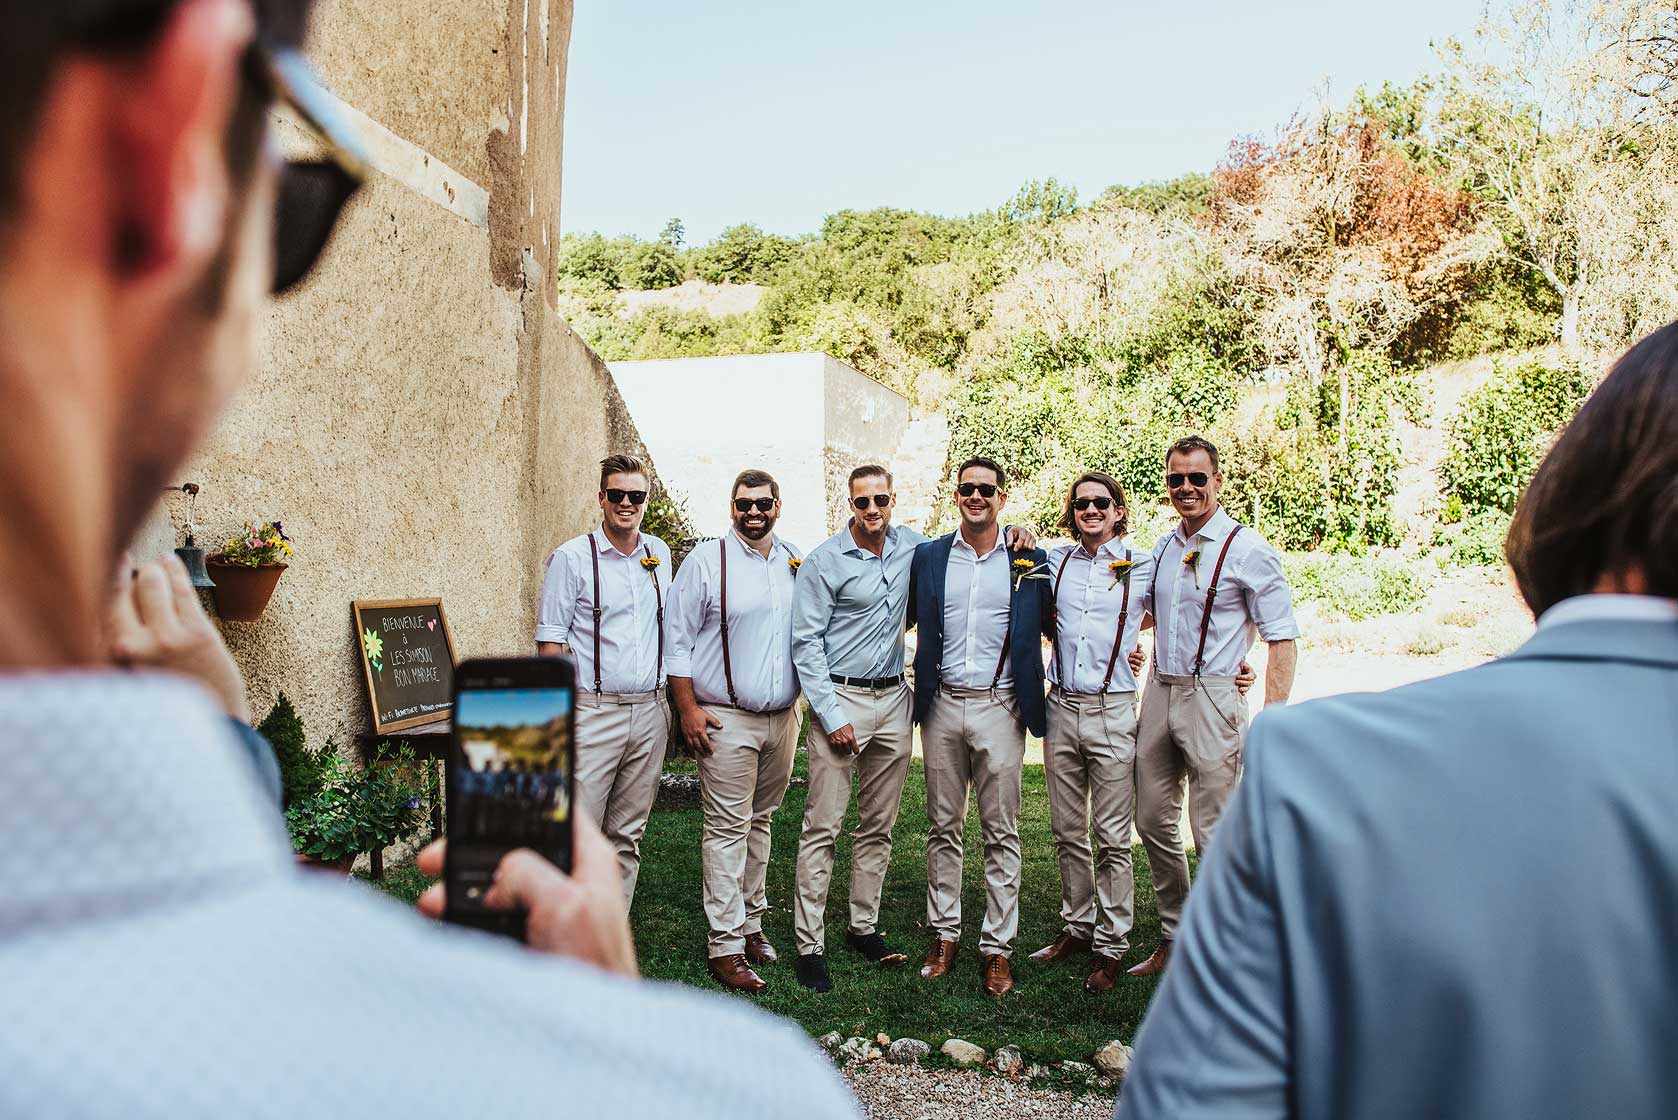 Reportage Wedding Photography in Languedoc